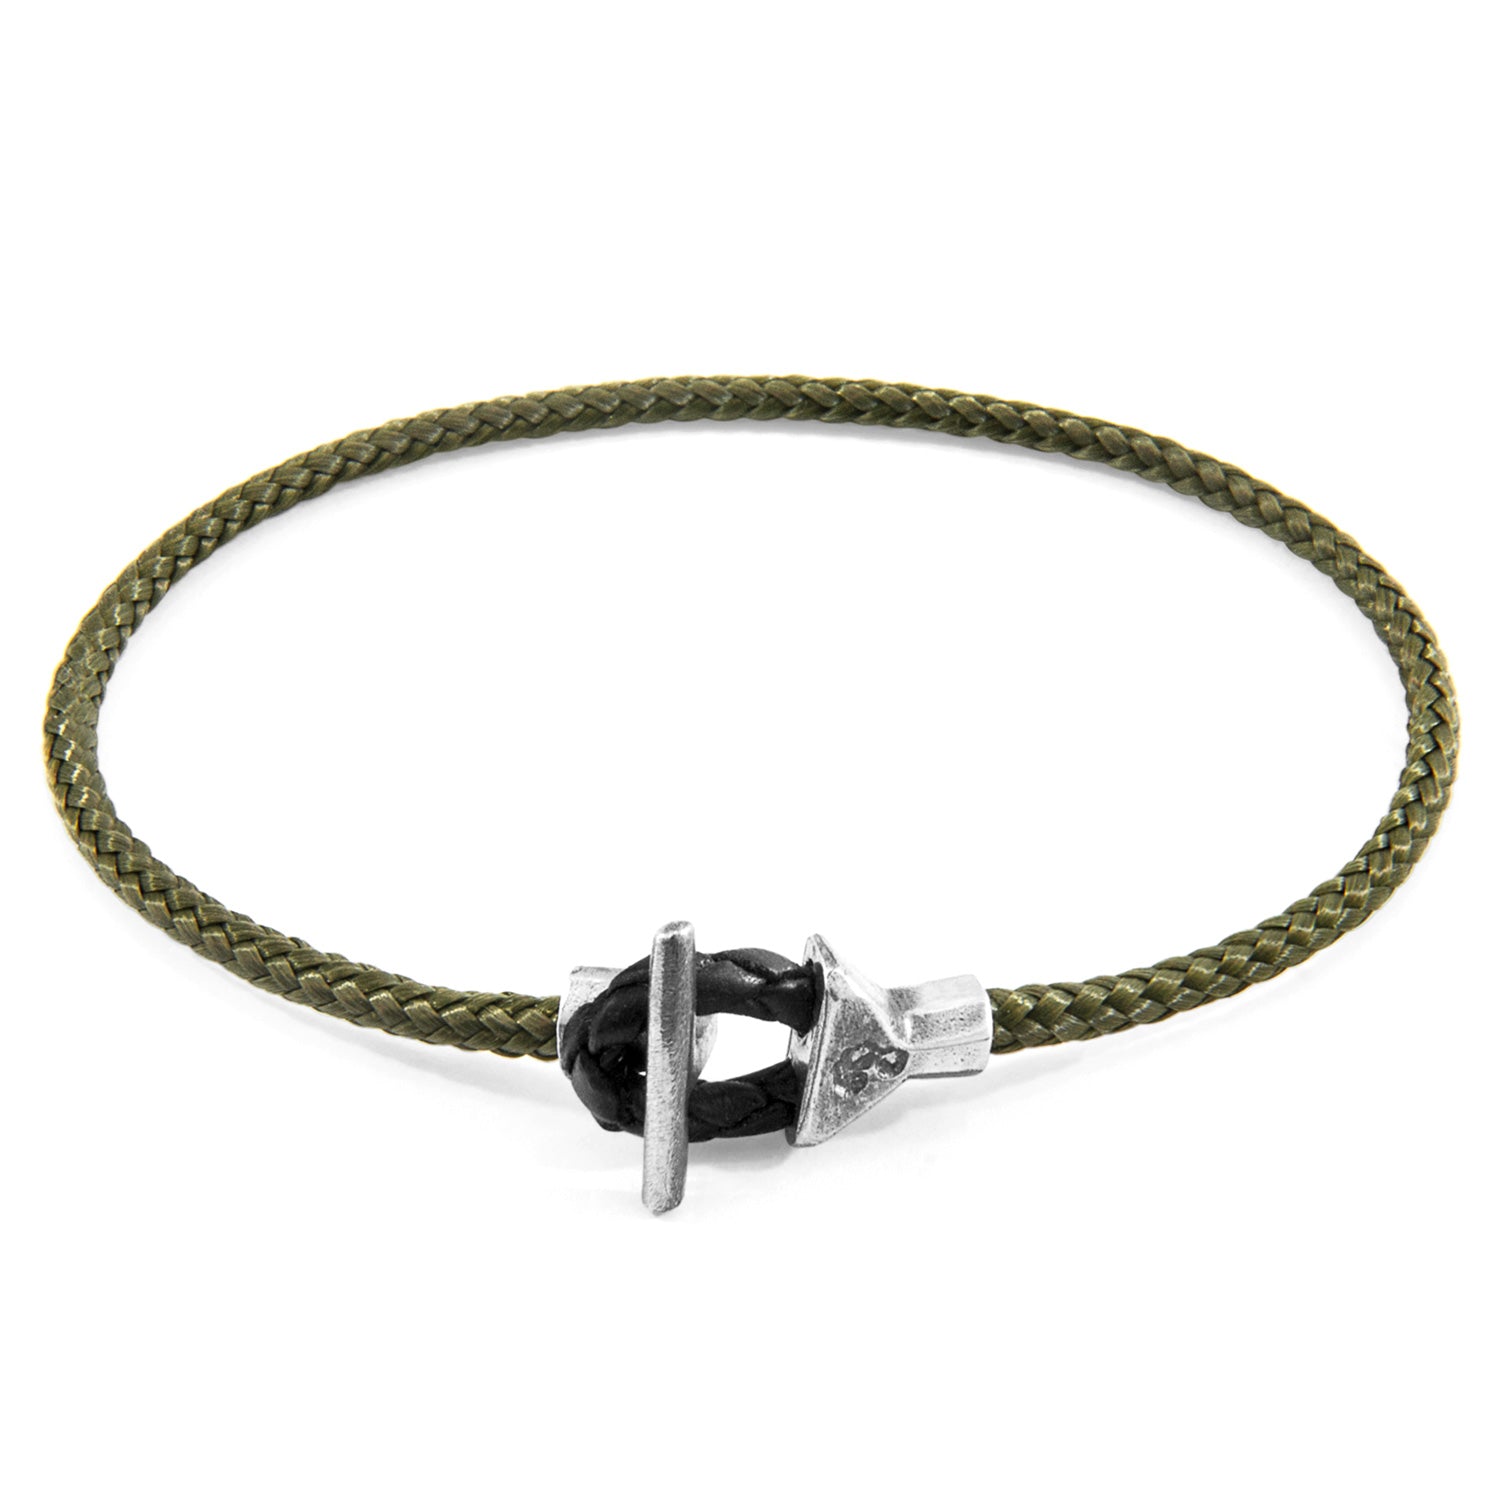 Khaki Green Cullen Silver and Rope Bracelet - Handcrafted in Great Britain with Marine Grade Polyester and Sterling Silver Clasp - Bracelets - Bijou Her -  -  - 